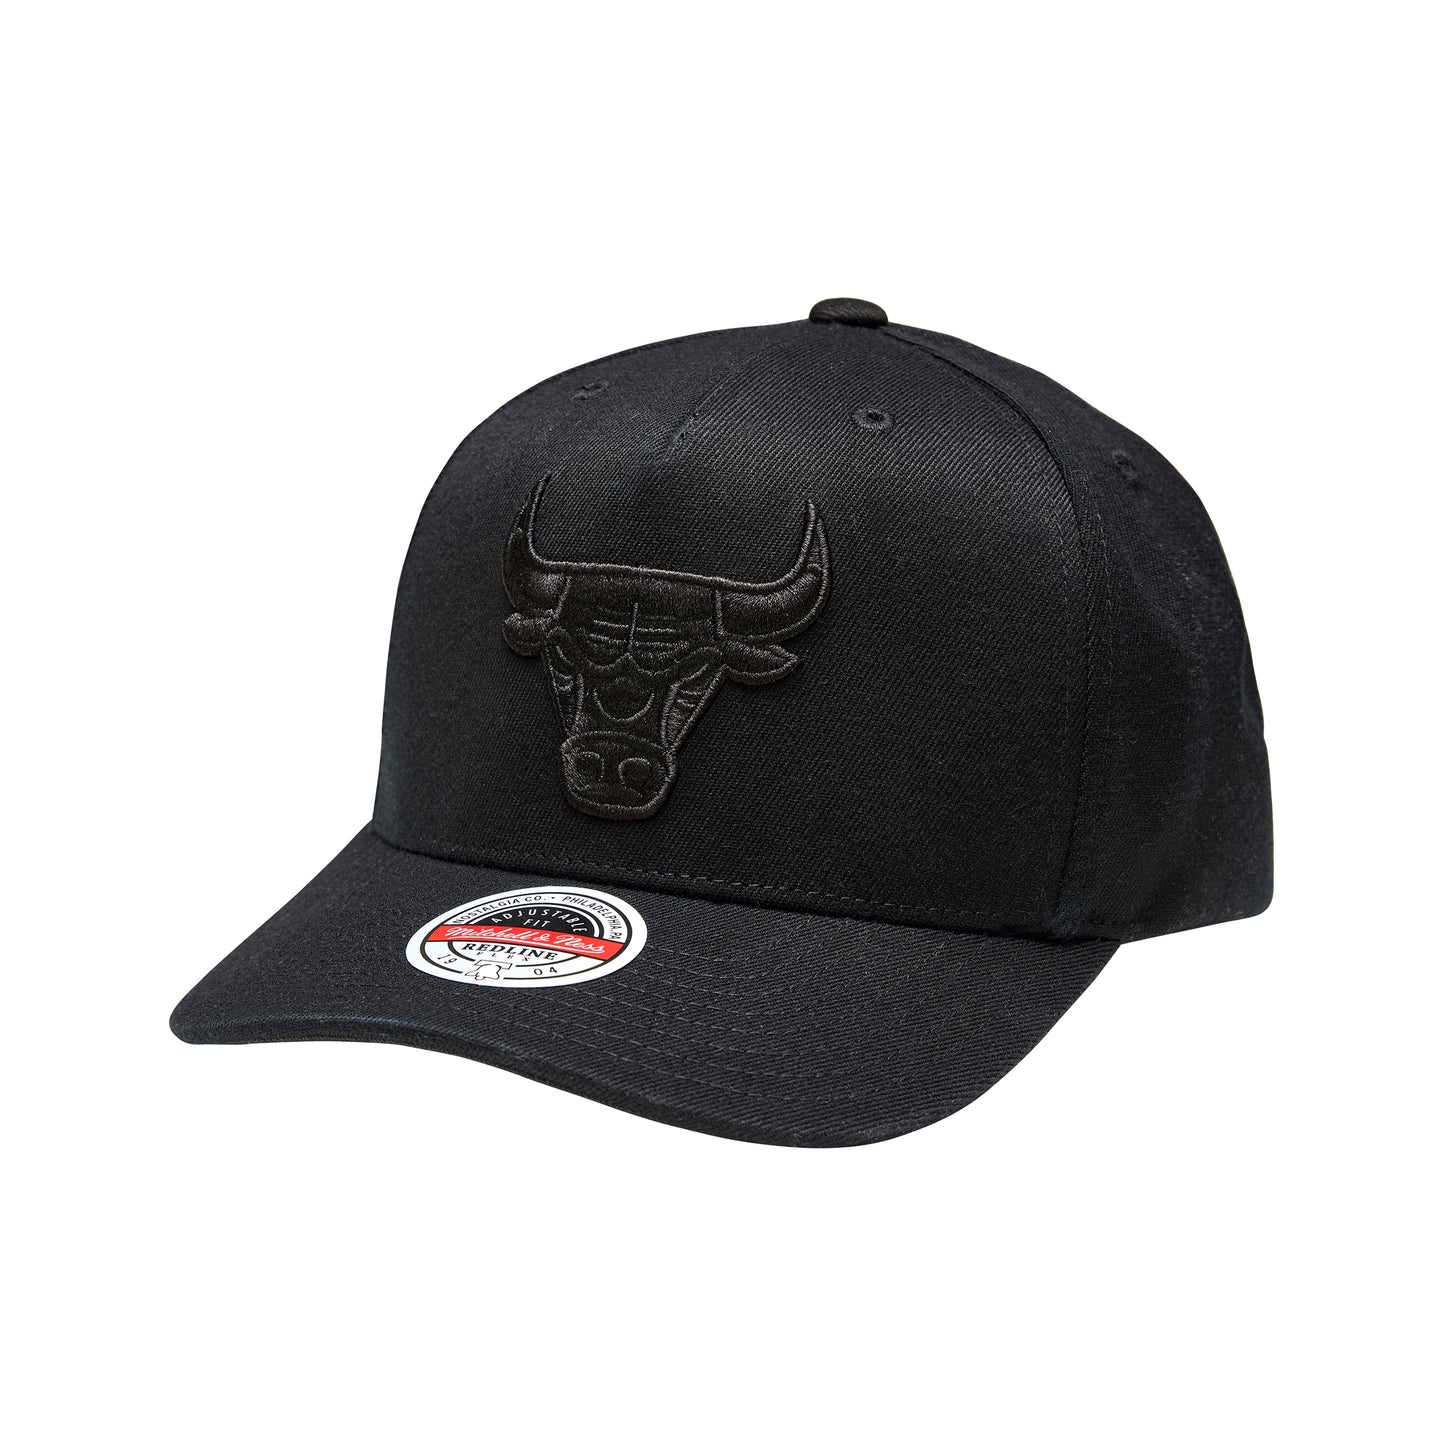 #Mitchell & Ness Chicago Bulls Classic Red Stretch Blk/Blk - F